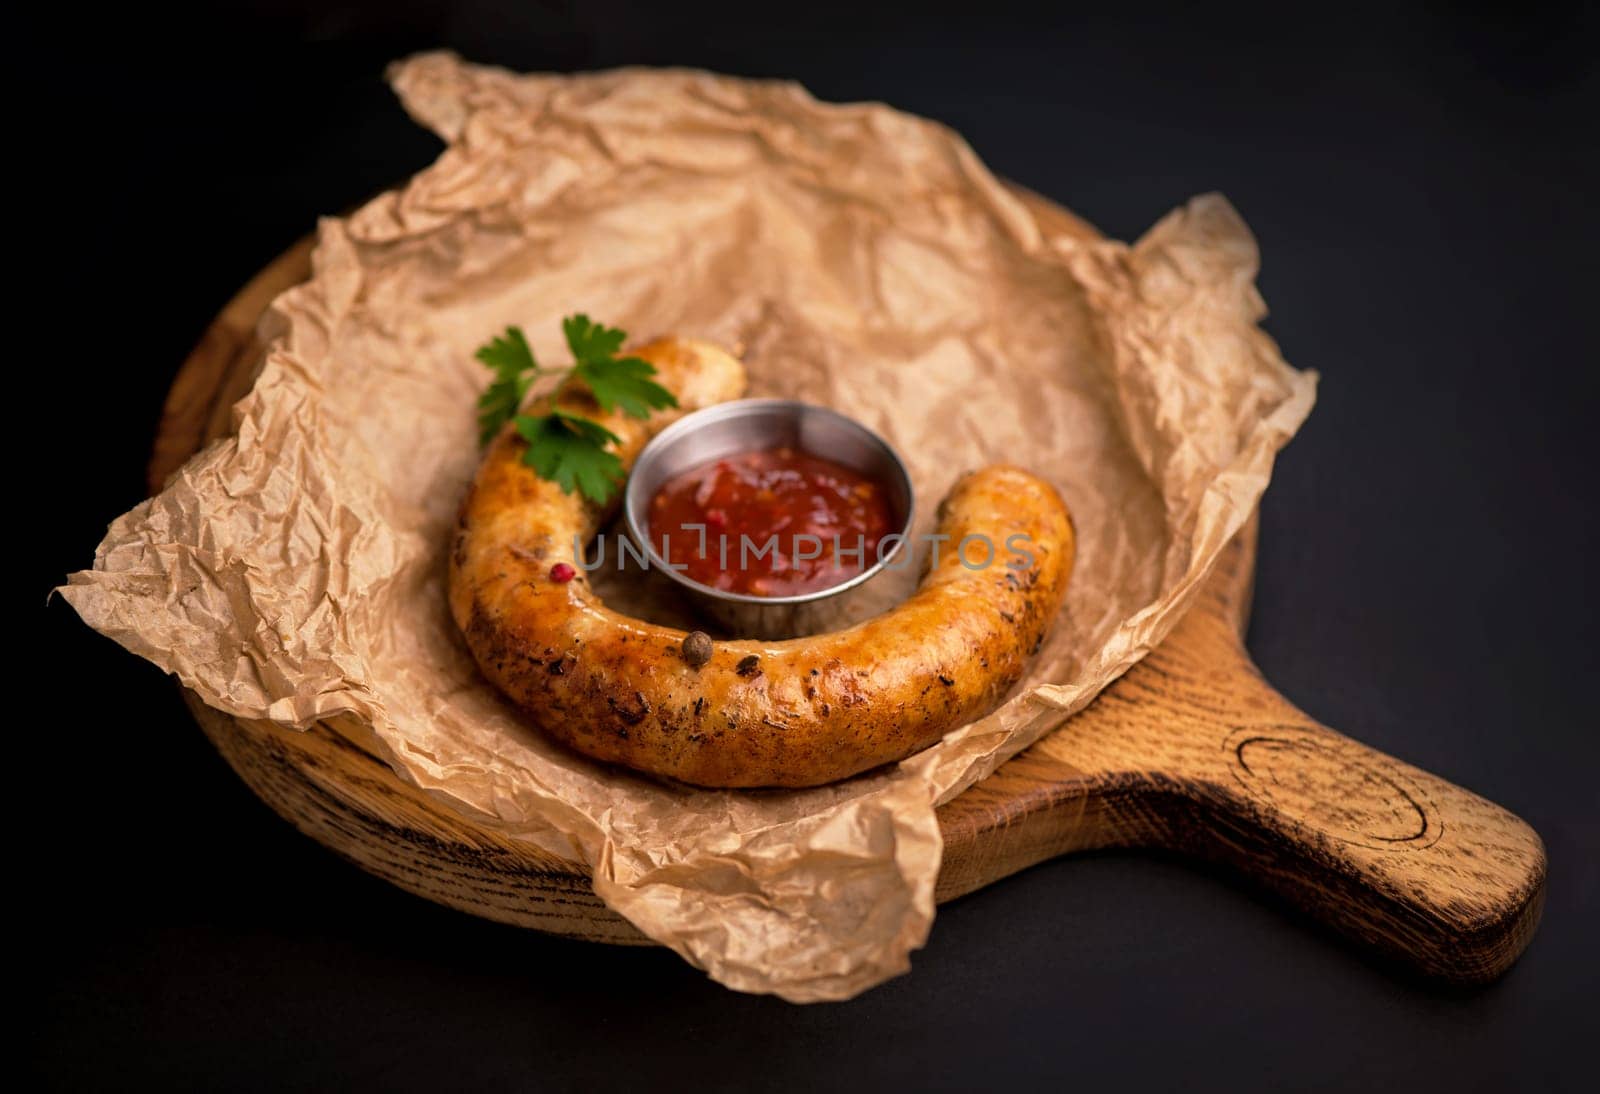 beer snacks - grilled sausages with sauce on a wooden board on a black background by aprilphoto